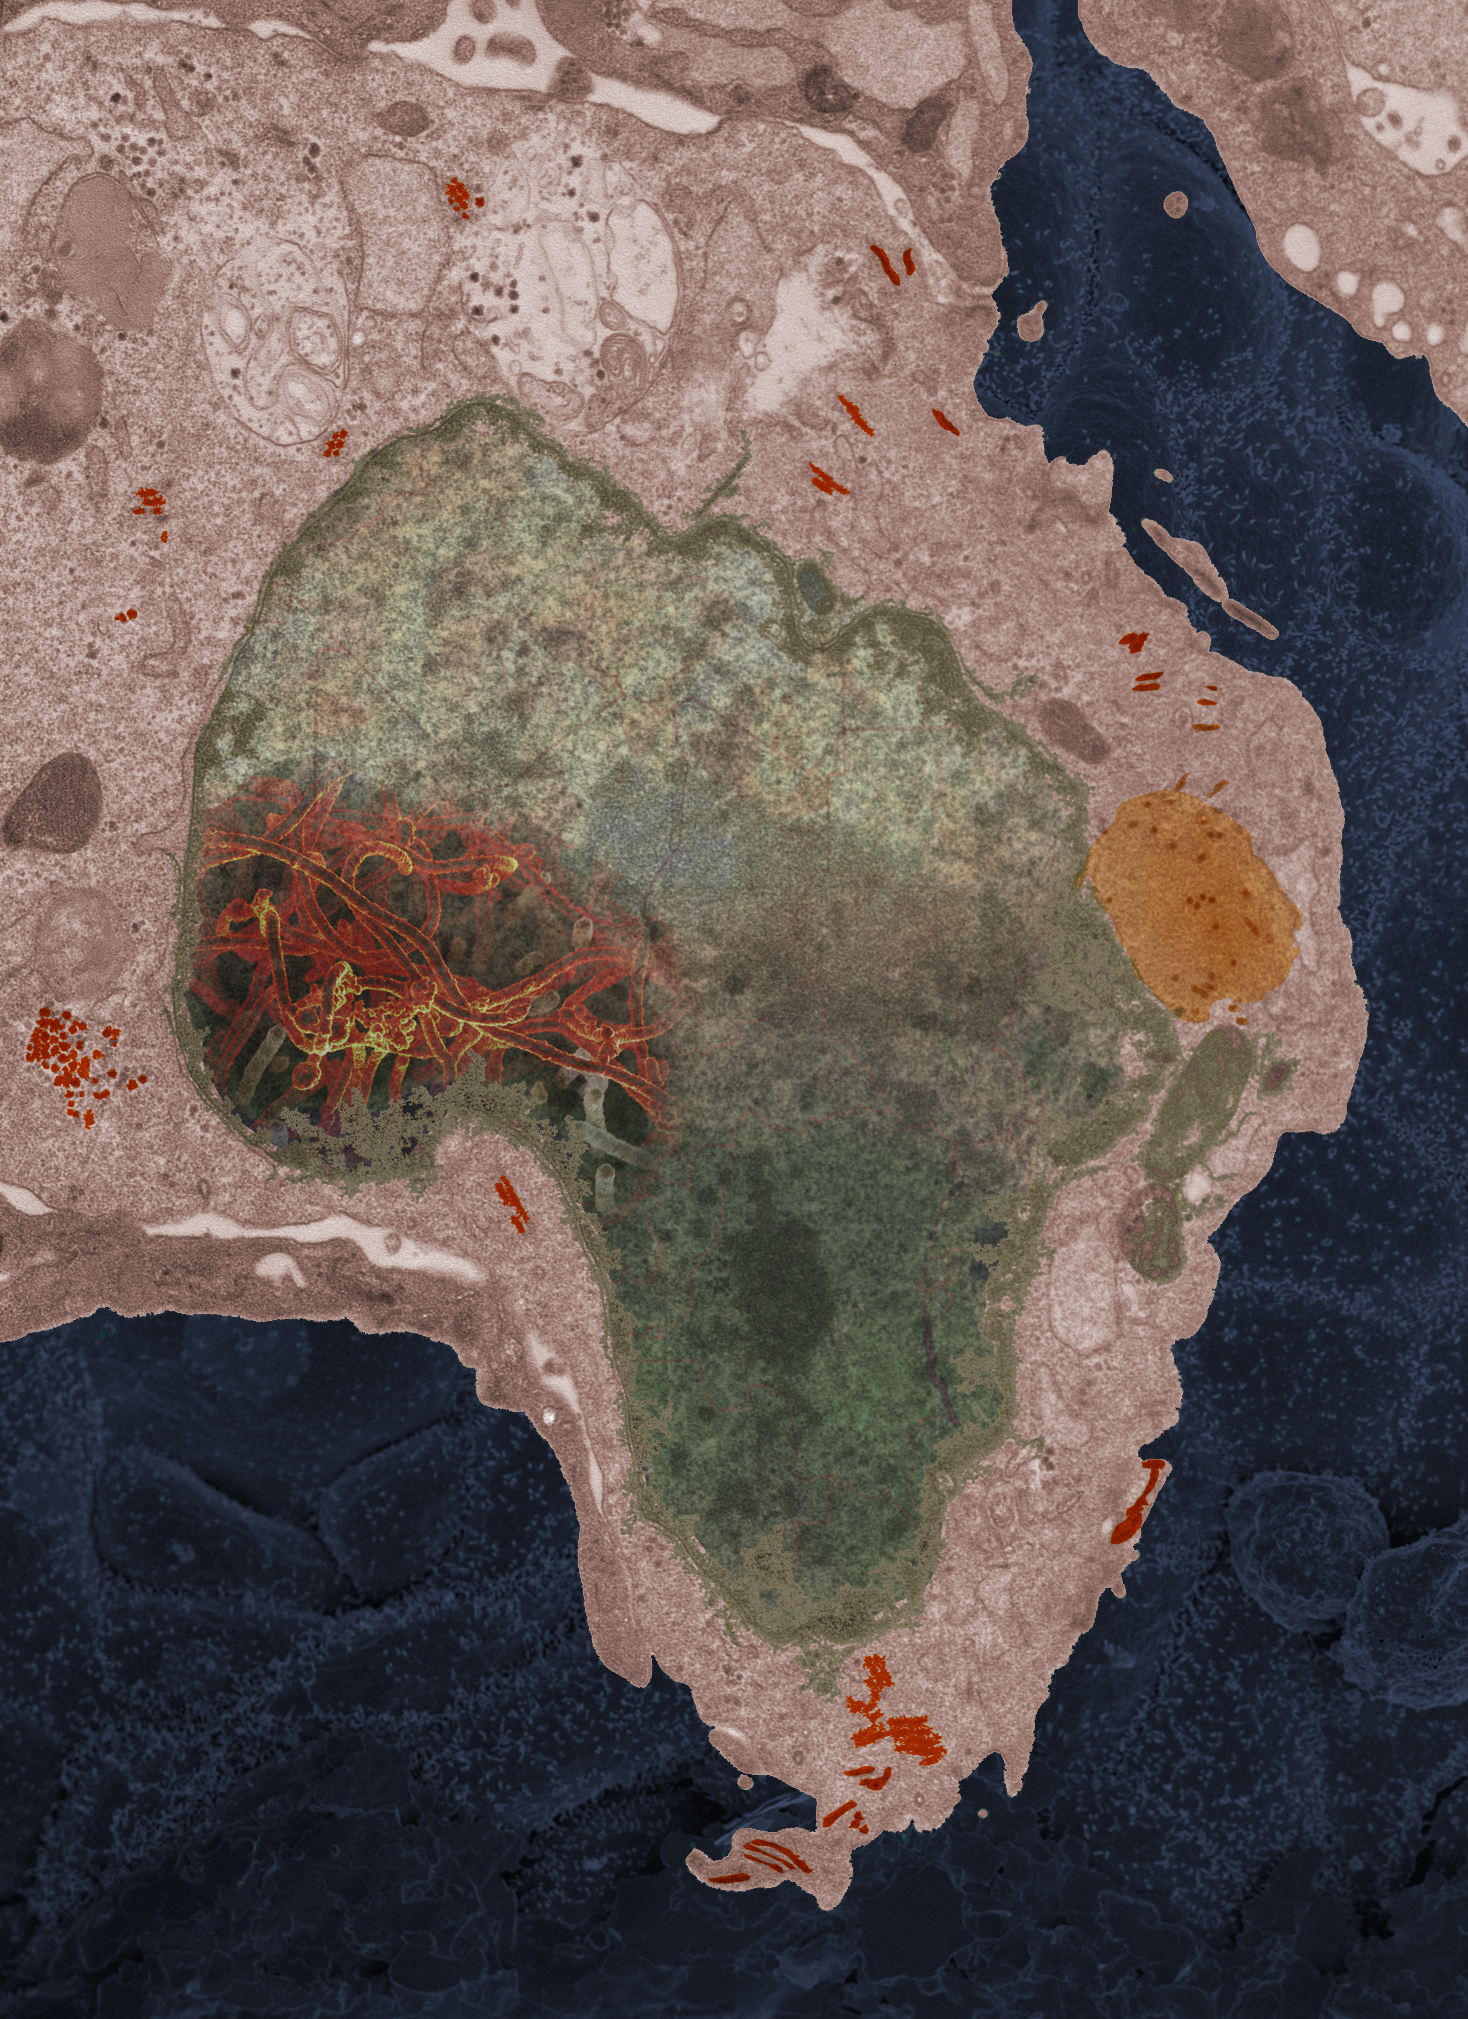 In 2014, Fischer received a sample of Ebola from a 2-year-old girl in Mali. The cell border and nucleus shape resemble the shape of Africa. (Courtesy of Elizabeth Fischer)